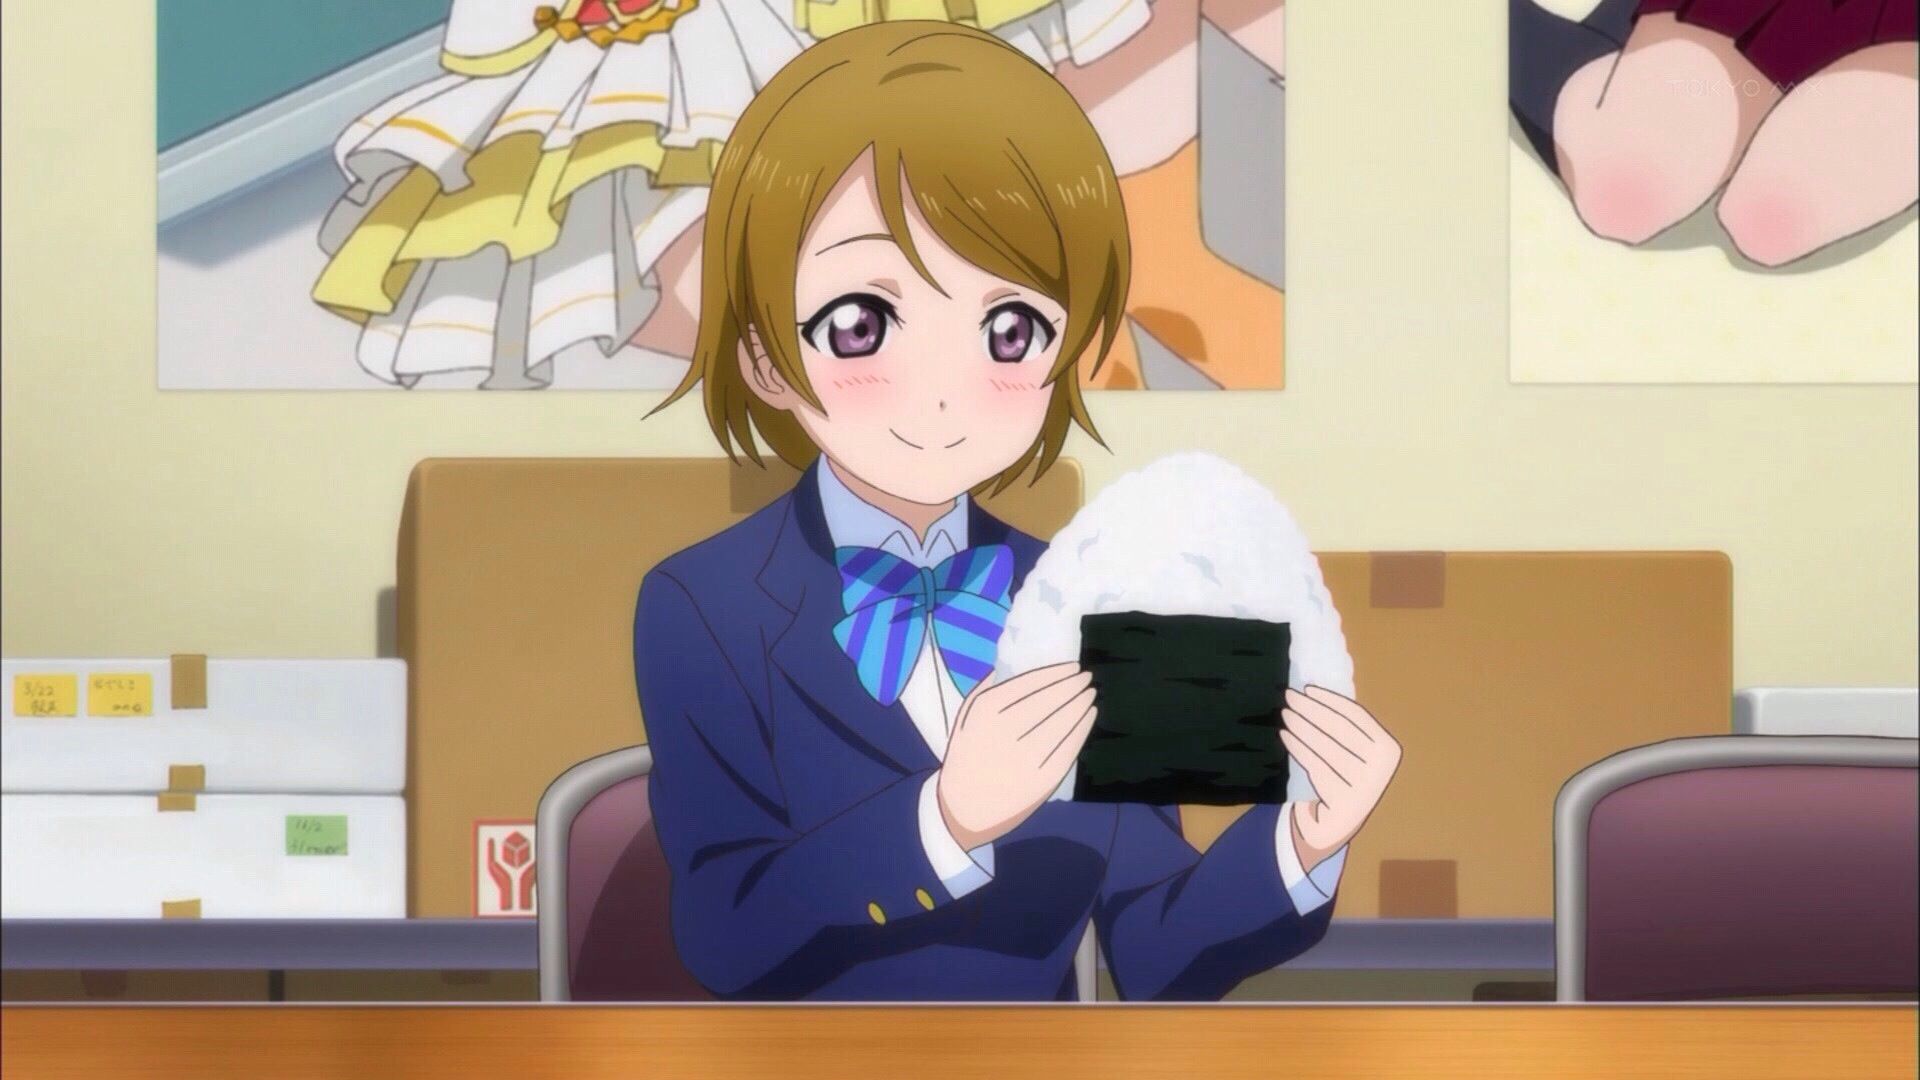 [Goddess images] "love live! "Of or's Chin as erotic pretty unspectacular as good girls become mothers is not www 12